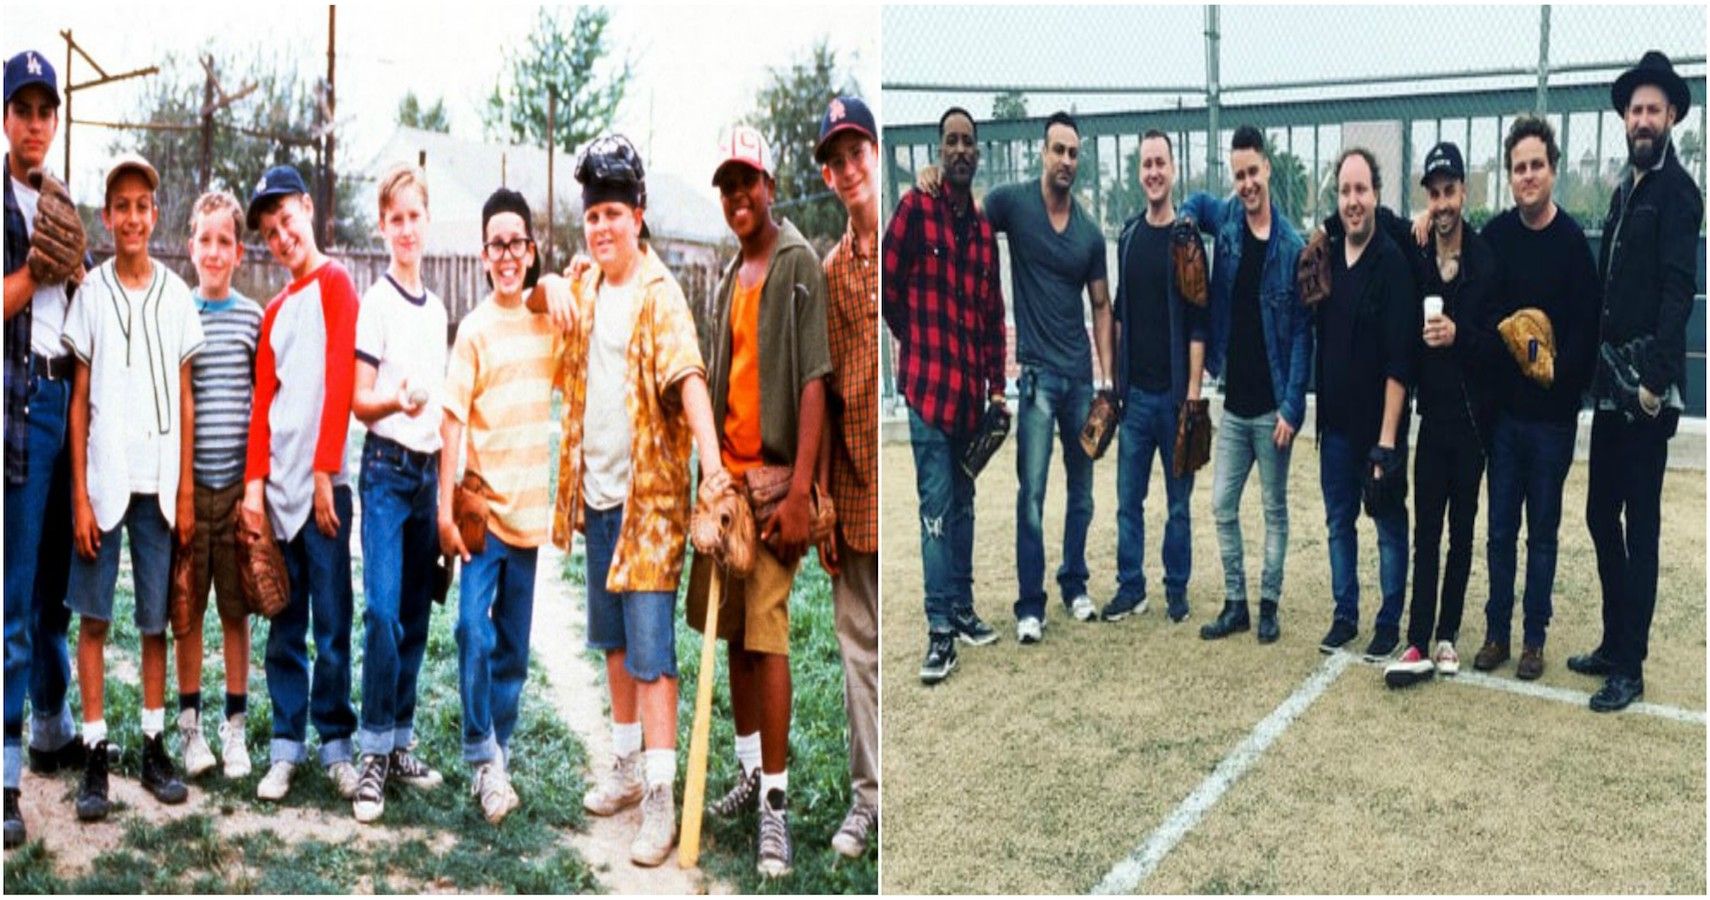 Cast of 'The Sandlot' Reunites After 25 Years Away From the Diamond